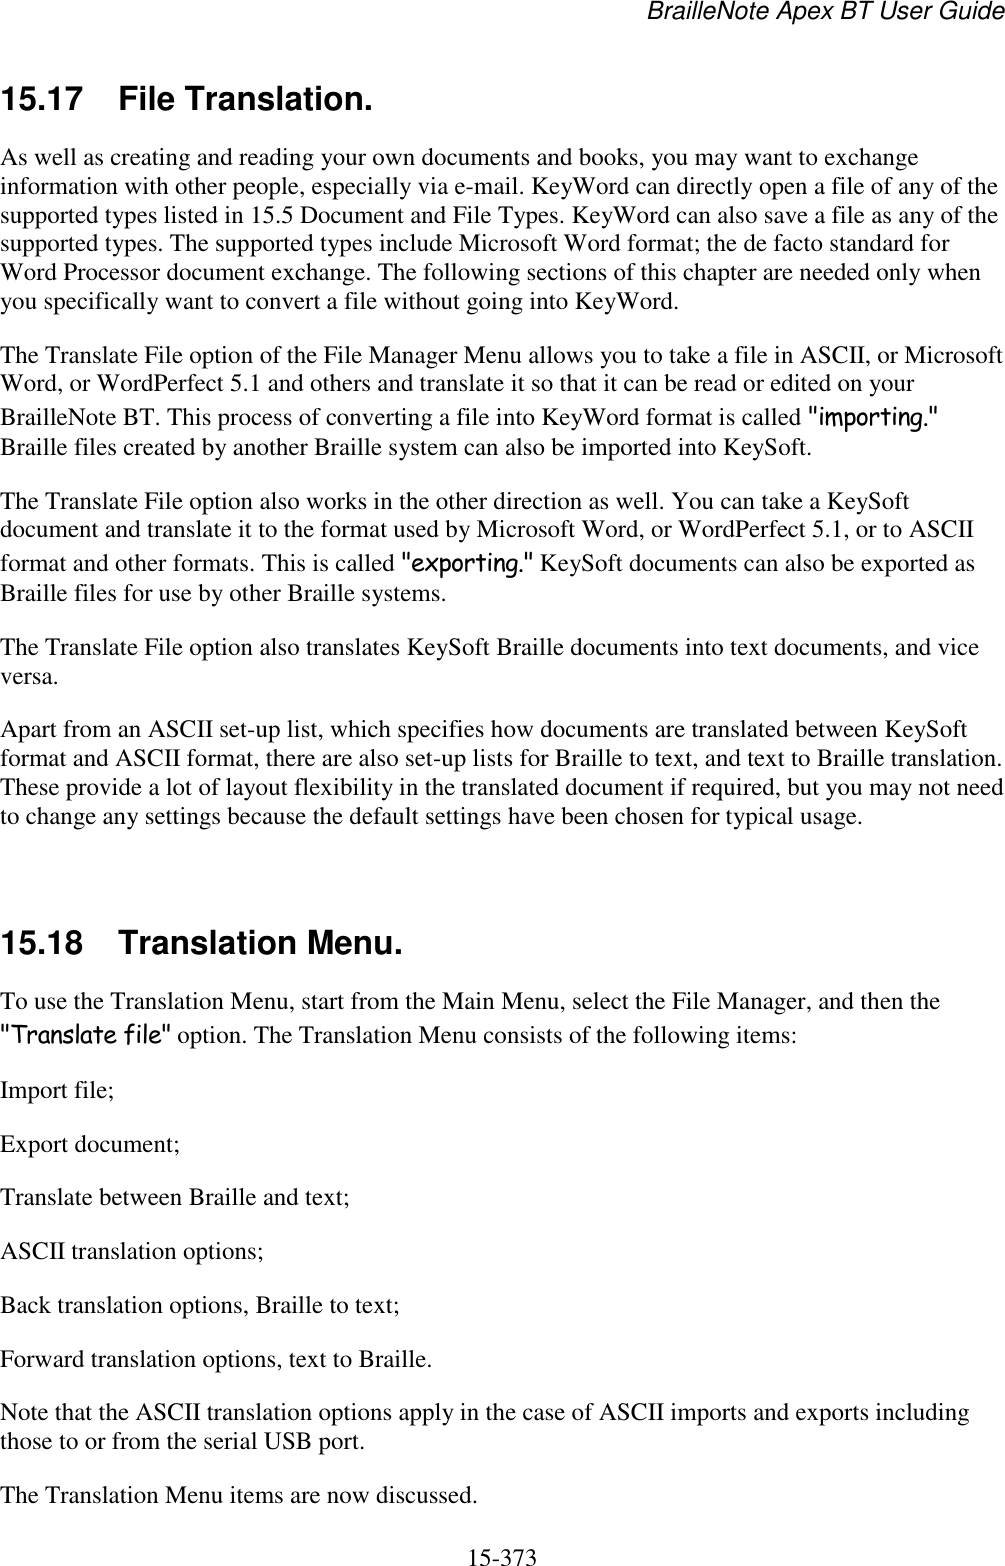 BrailleNote Apex BT User Guide   15-373   15.17  File Translation. As well as creating and reading your own documents and books, you may want to exchange information with other people, especially via e-mail. KeyWord can directly open a file of any of the supported types listed in 15.5 Document and File Types. KeyWord can also save a file as any of the supported types. The supported types include Microsoft Word format; the de facto standard for Word Processor document exchange. The following sections of this chapter are needed only when you specifically want to convert a file without going into KeyWord. The Translate File option of the File Manager Menu allows you to take a file in ASCII, or Microsoft Word, or WordPerfect 5.1 and others and translate it so that it can be read or edited on your BrailleNote BT. This process of converting a file into KeyWord format is called &quot;importing.&quot; Braille files created by another Braille system can also be imported into KeySoft. The Translate File option also works in the other direction as well. You can take a KeySoft document and translate it to the format used by Microsoft Word, or WordPerfect 5.1, or to ASCII format and other formats. This is called &quot;exporting.&quot; KeySoft documents can also be exported as Braille files for use by other Braille systems. The Translate File option also translates KeySoft Braille documents into text documents, and vice versa. Apart from an ASCII set-up list, which specifies how documents are translated between KeySoft format and ASCII format, there are also set-up lists for Braille to text, and text to Braille translation. These provide a lot of layout flexibility in the translated document if required, but you may not need to change any settings because the default settings have been chosen for typical usage.   15.18  Translation Menu. To use the Translation Menu, start from the Main Menu, select the File Manager, and then the &quot;Translate file&quot; option. The Translation Menu consists of the following items: Import file; Export document; Translate between Braille and text; ASCII translation options; Back translation options, Braille to text; Forward translation options, text to Braille. Note that the ASCII translation options apply in the case of ASCII imports and exports including those to or from the serial USB port.  The Translation Menu items are now discussed.  